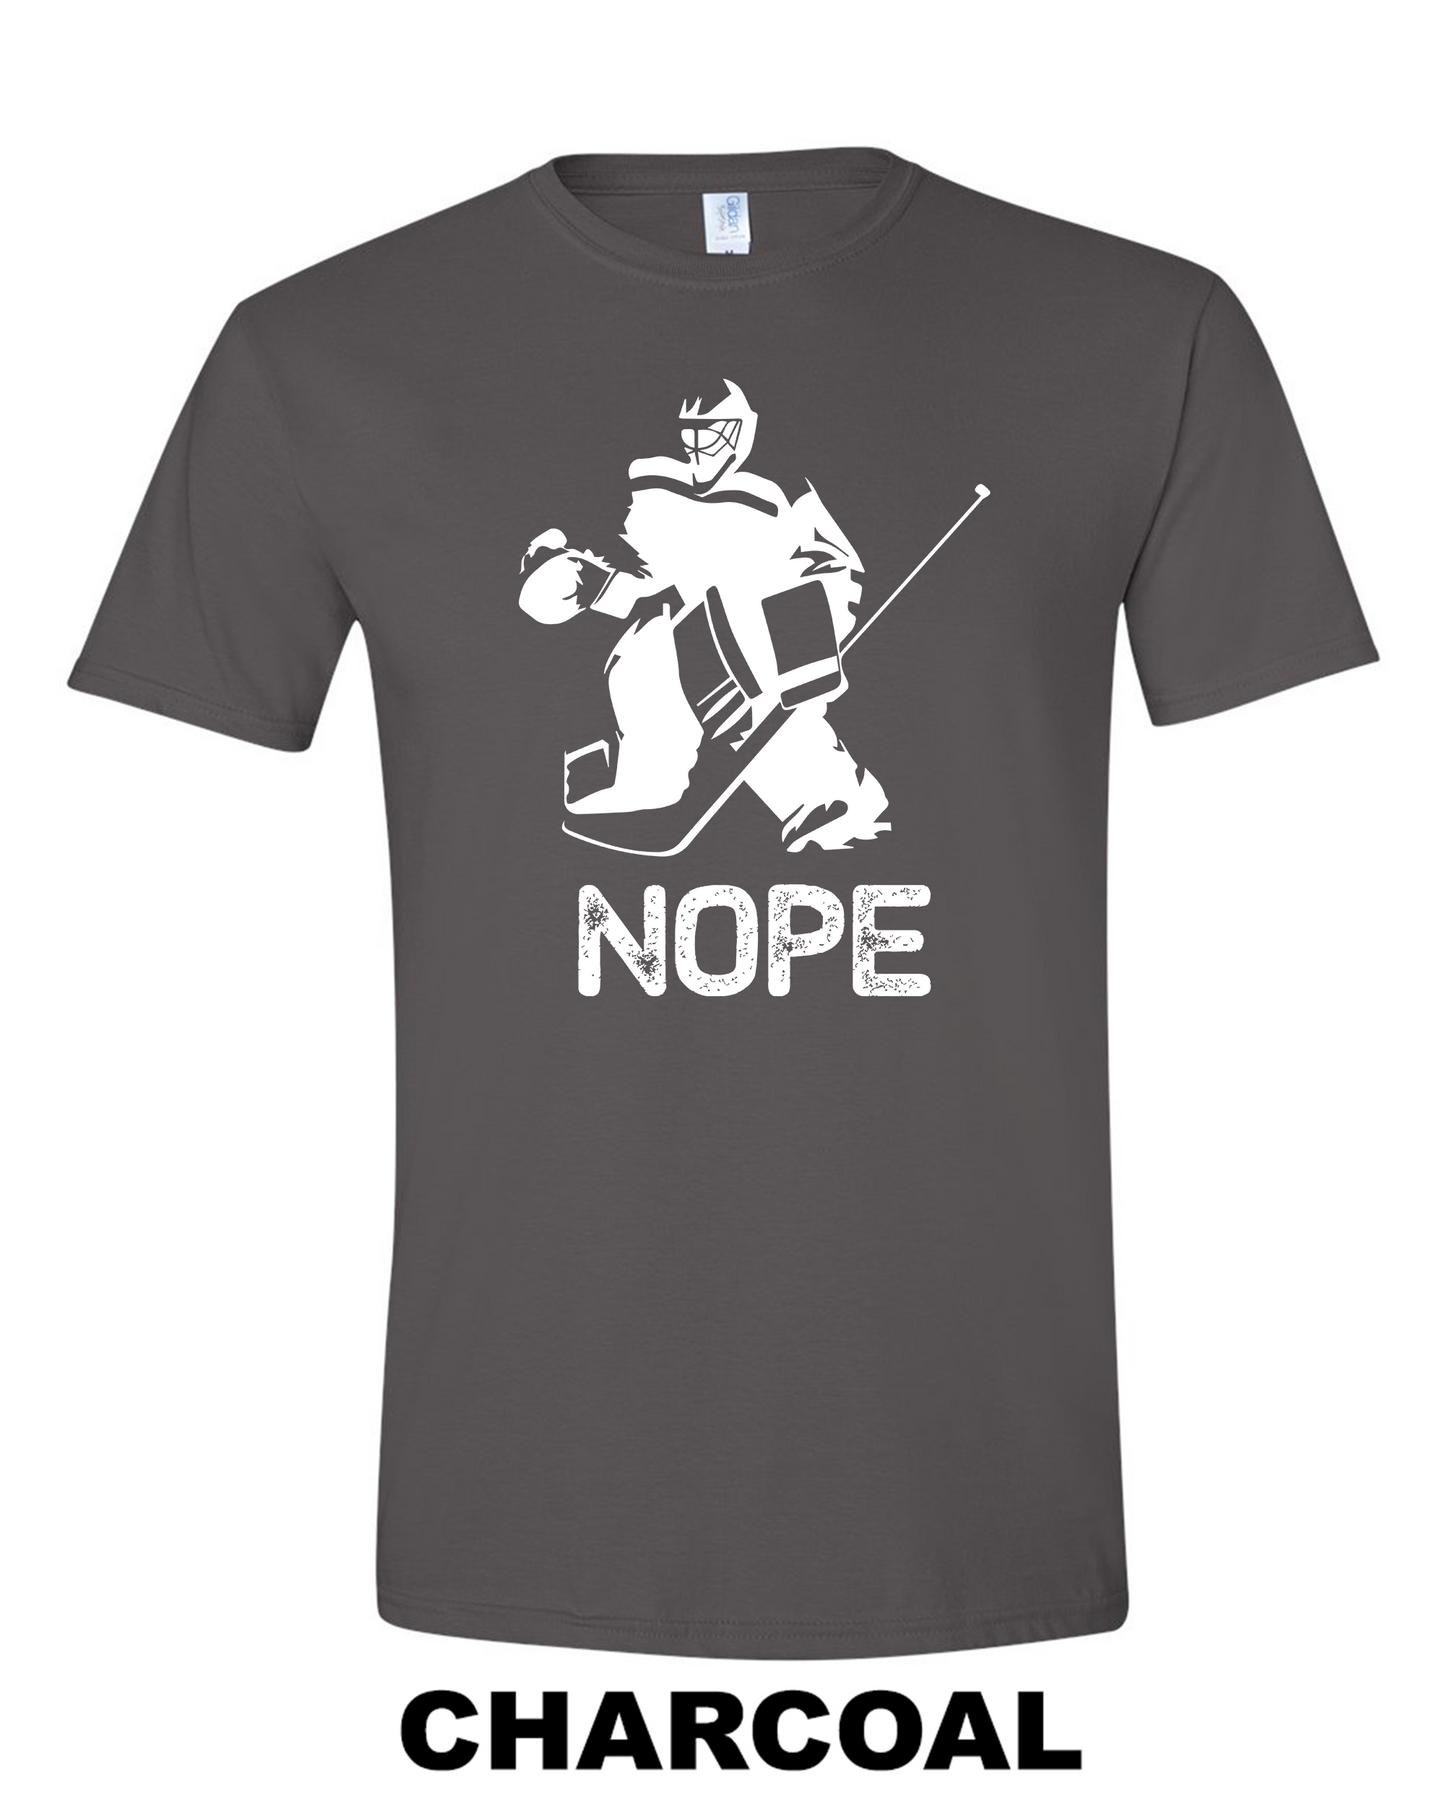 Nope (2 colors)